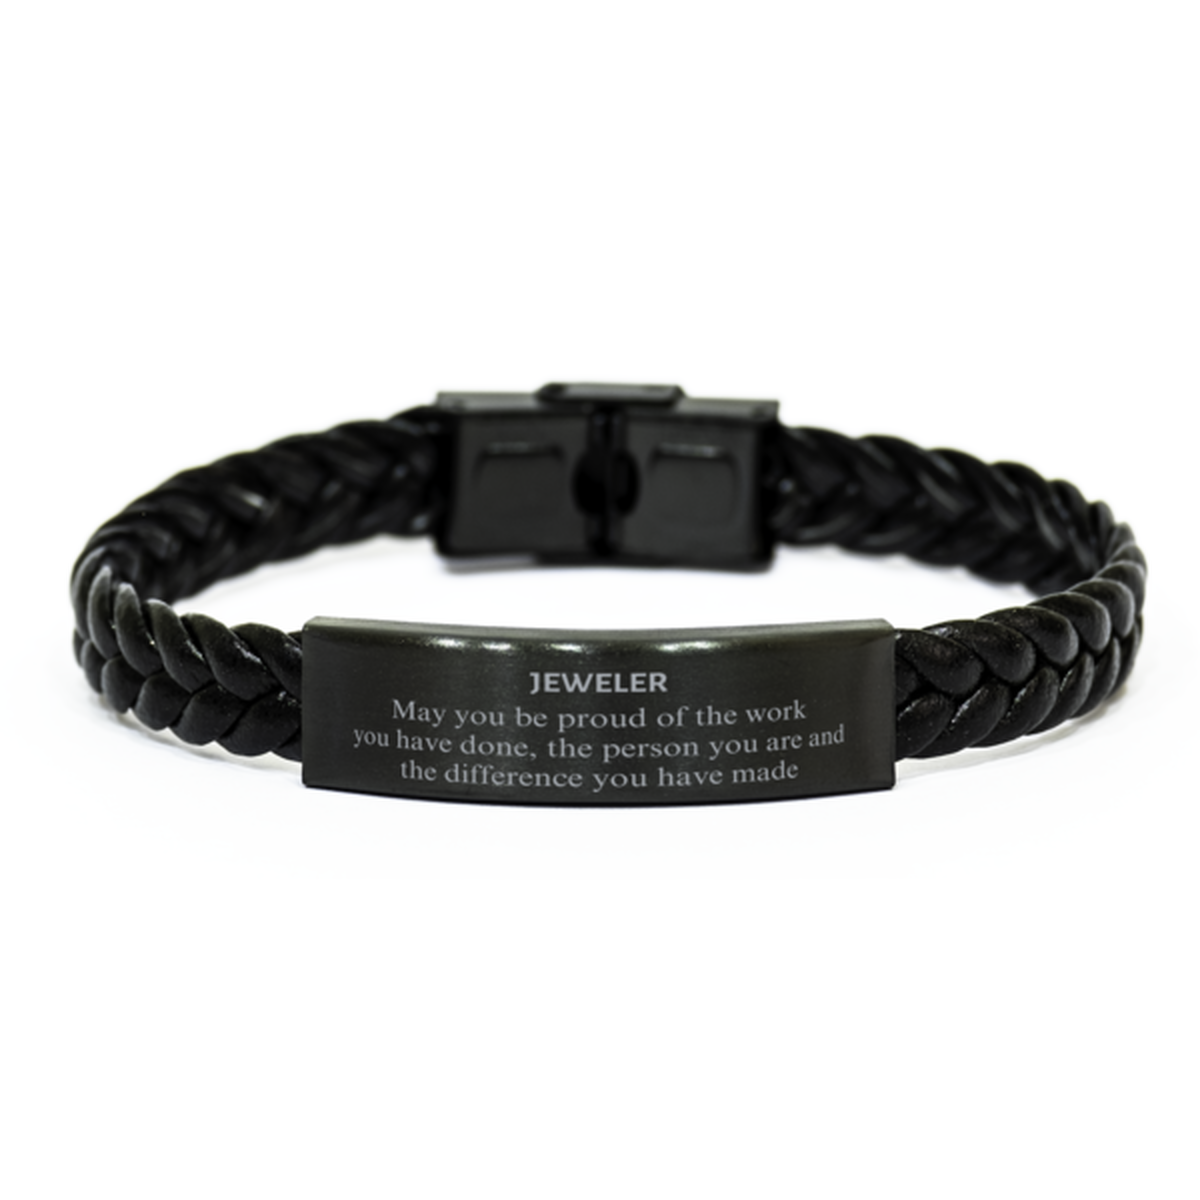 Jeweler May you be proud of the work you have done, Retirement Jeweler Braided Leather Bracelet for Colleague Appreciation Gifts Amazing for Jeweler